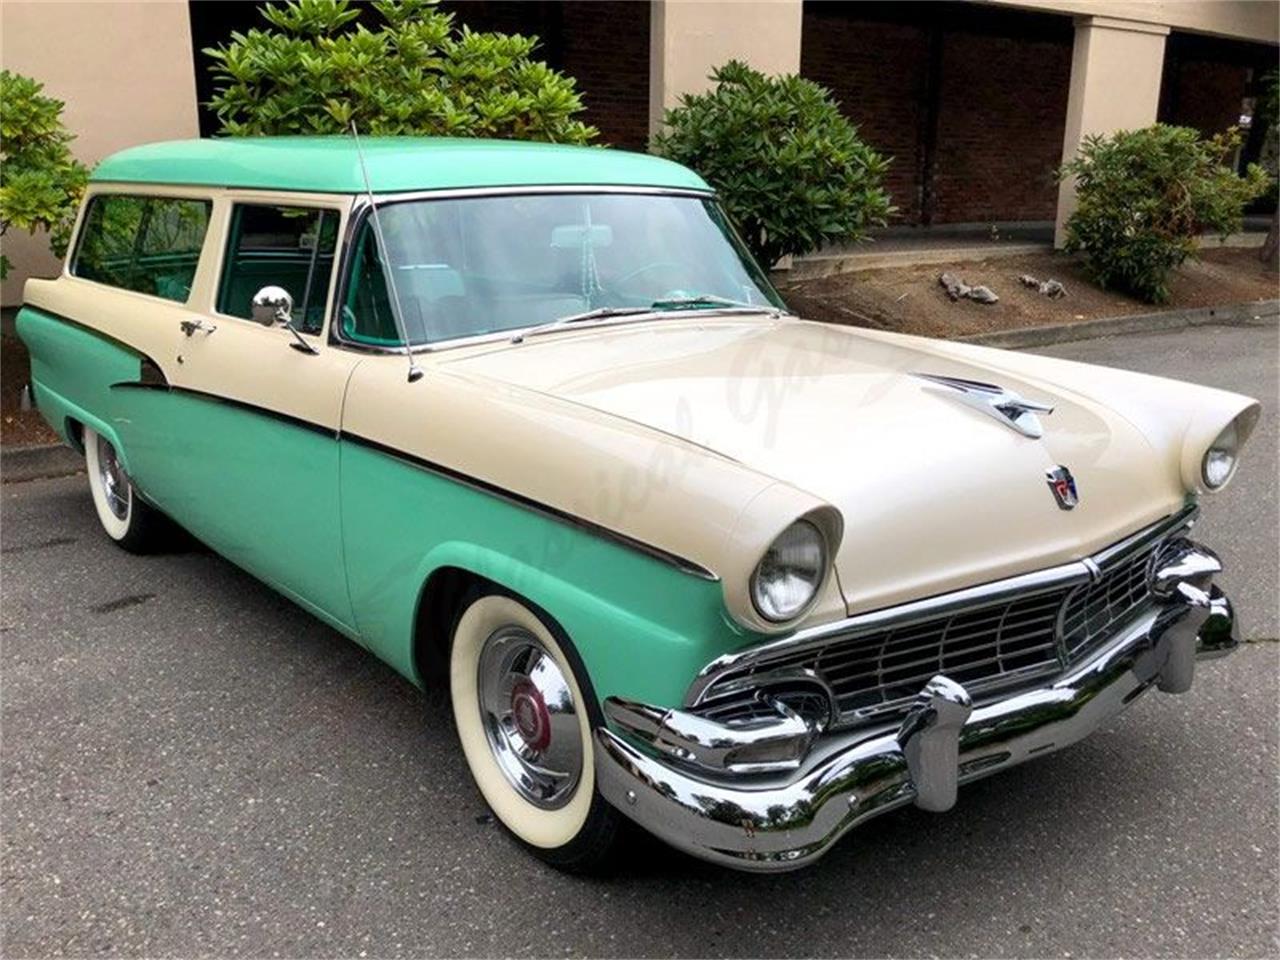 For Sale: 1956 Ford Station Wagon in Arlington, Texas.